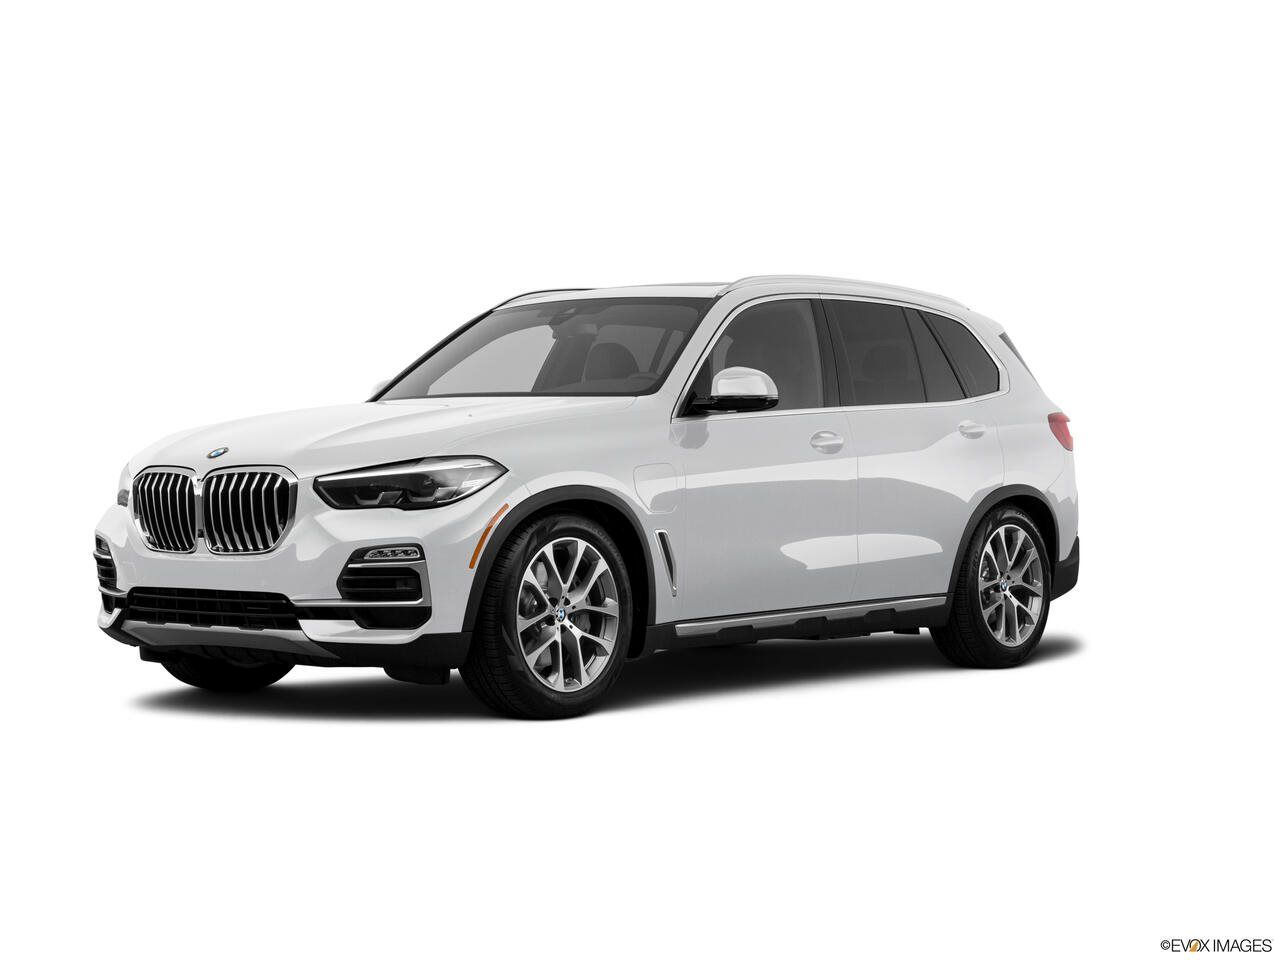 2021 BMW X5 Research, photos, specs, and expertise